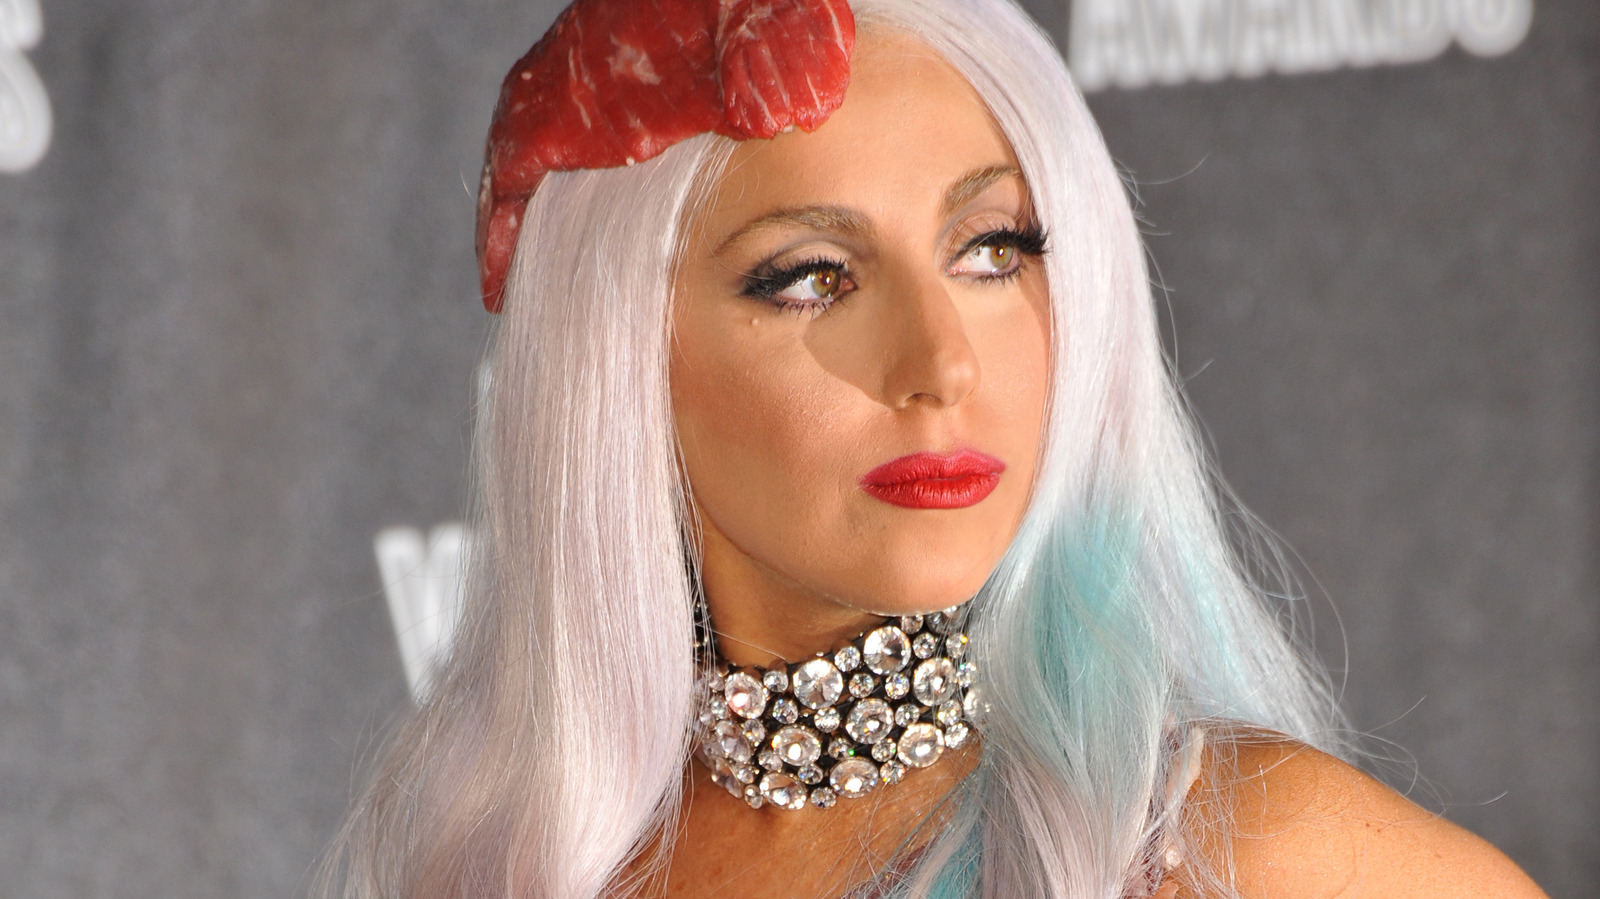 Lady Gaga's Meat Dress: An Iconic Fashion Moment, Explained